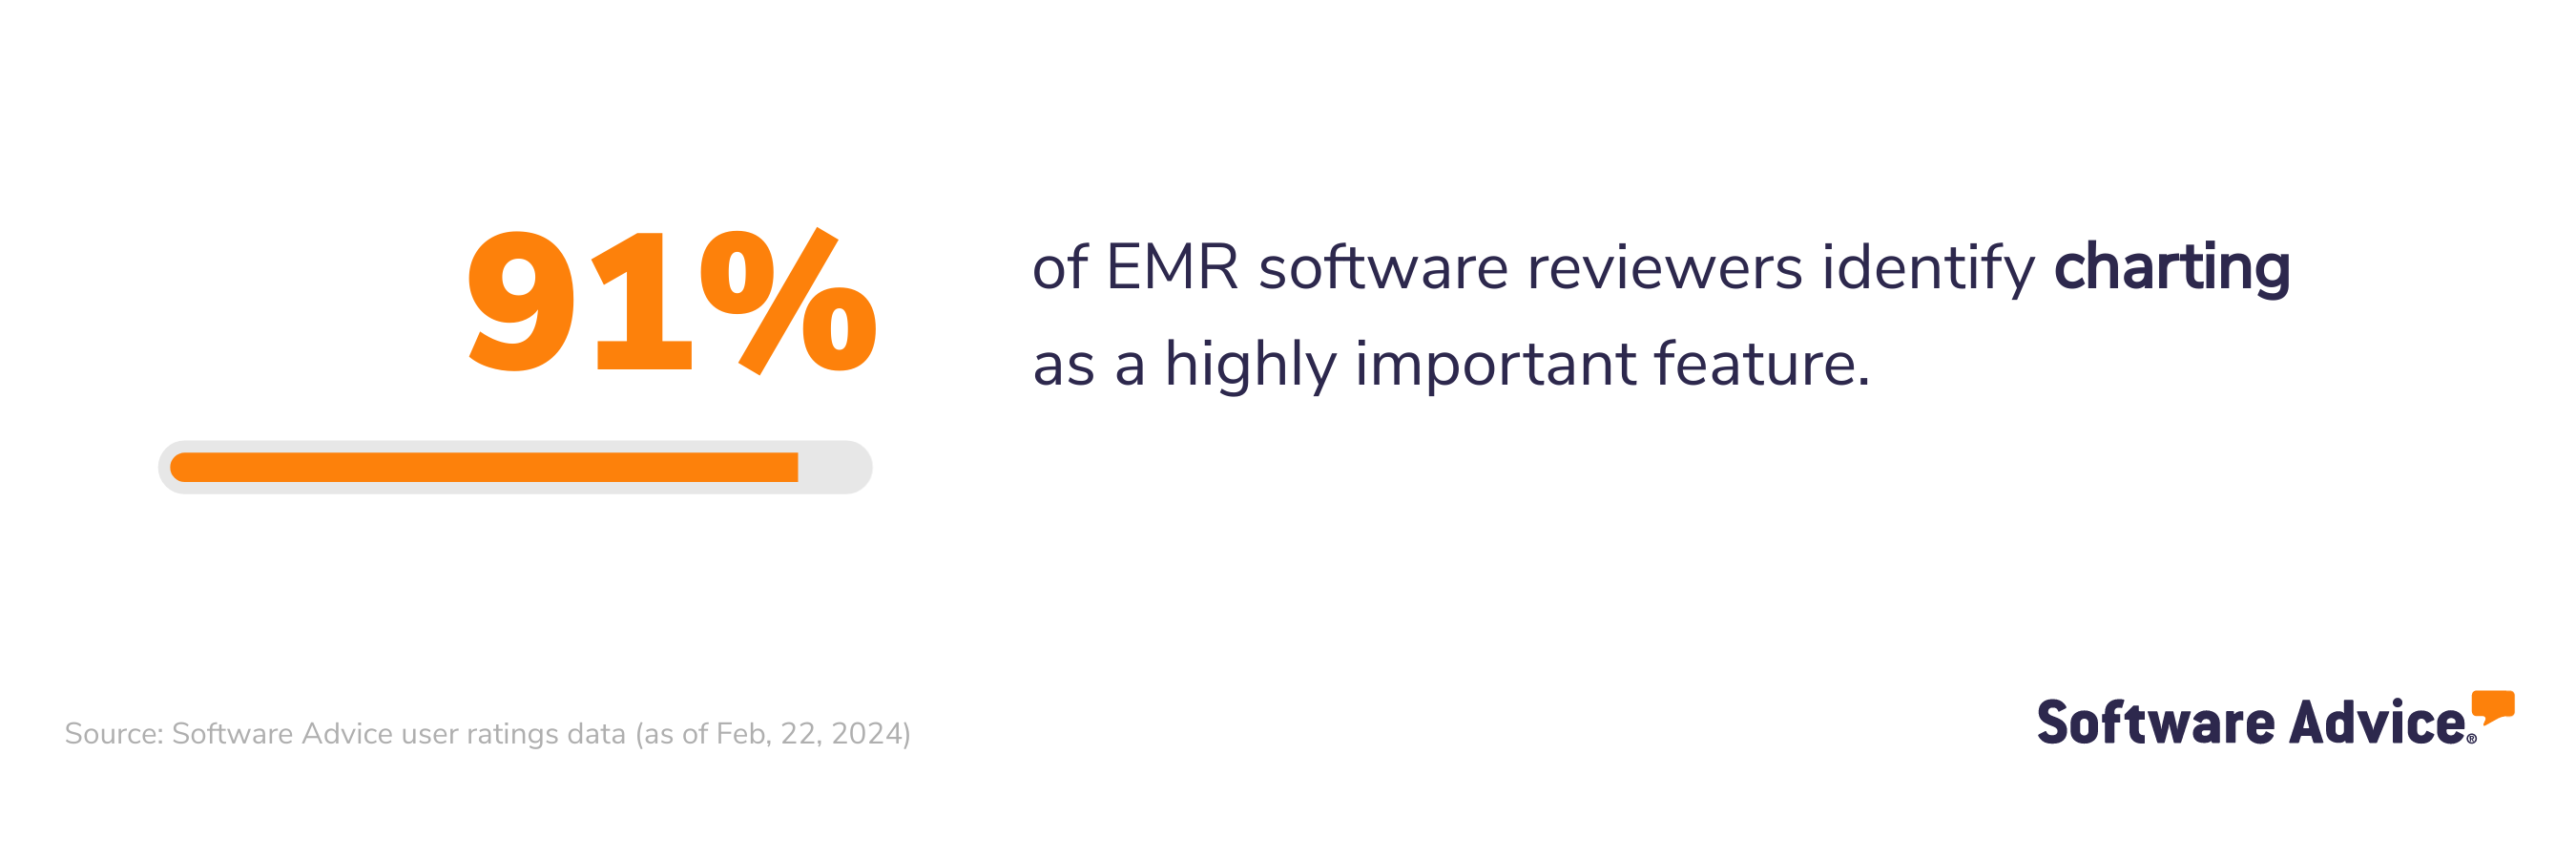 91% of EMR software reviews identify charting as a highly important feature.